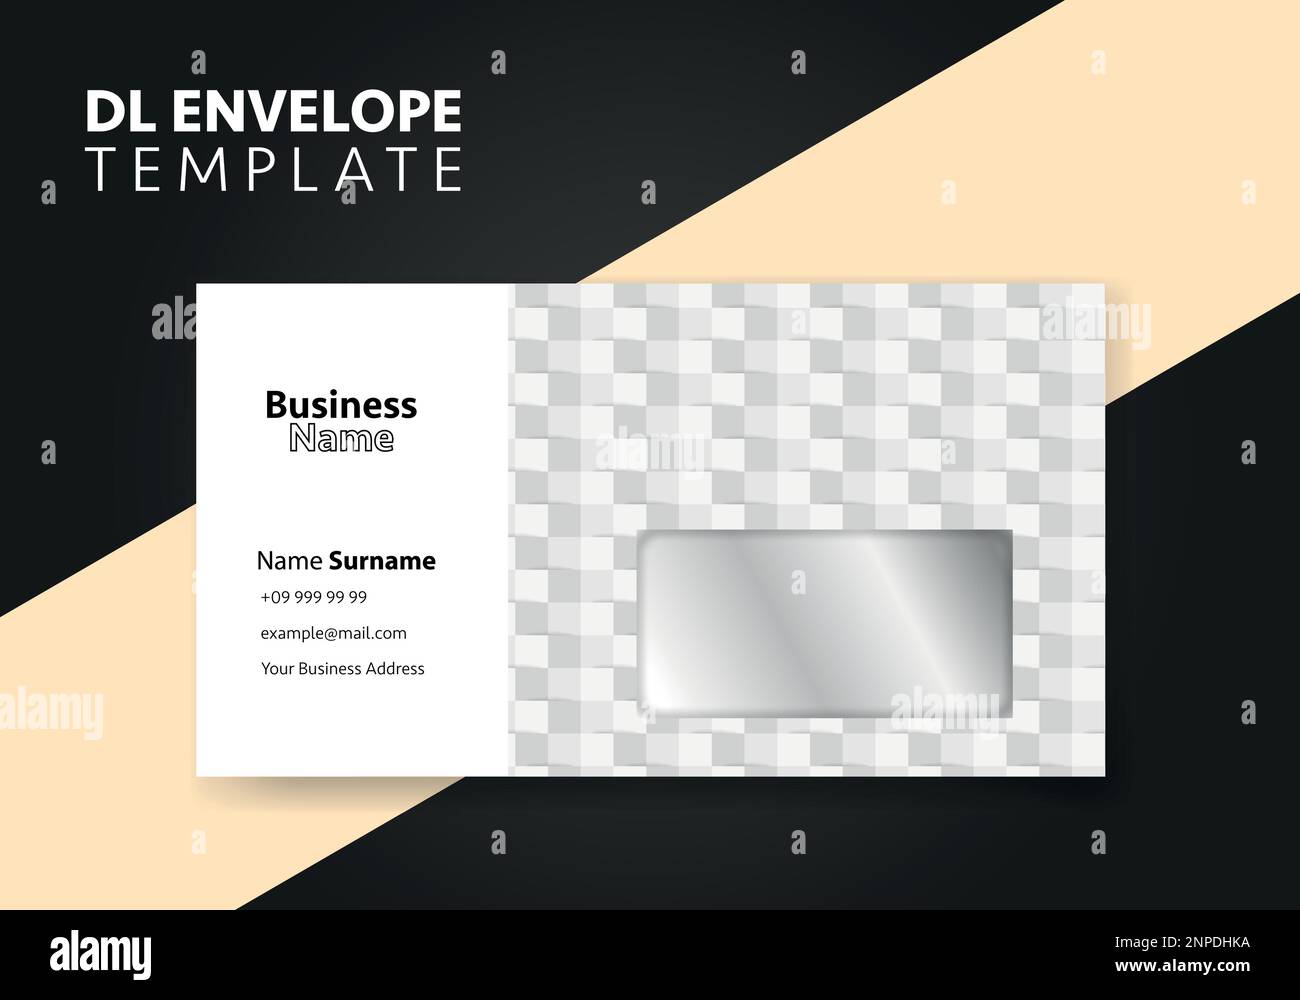 envelope-design-template-free-vector-download-25-414-free-vector-for-commercial-use-format